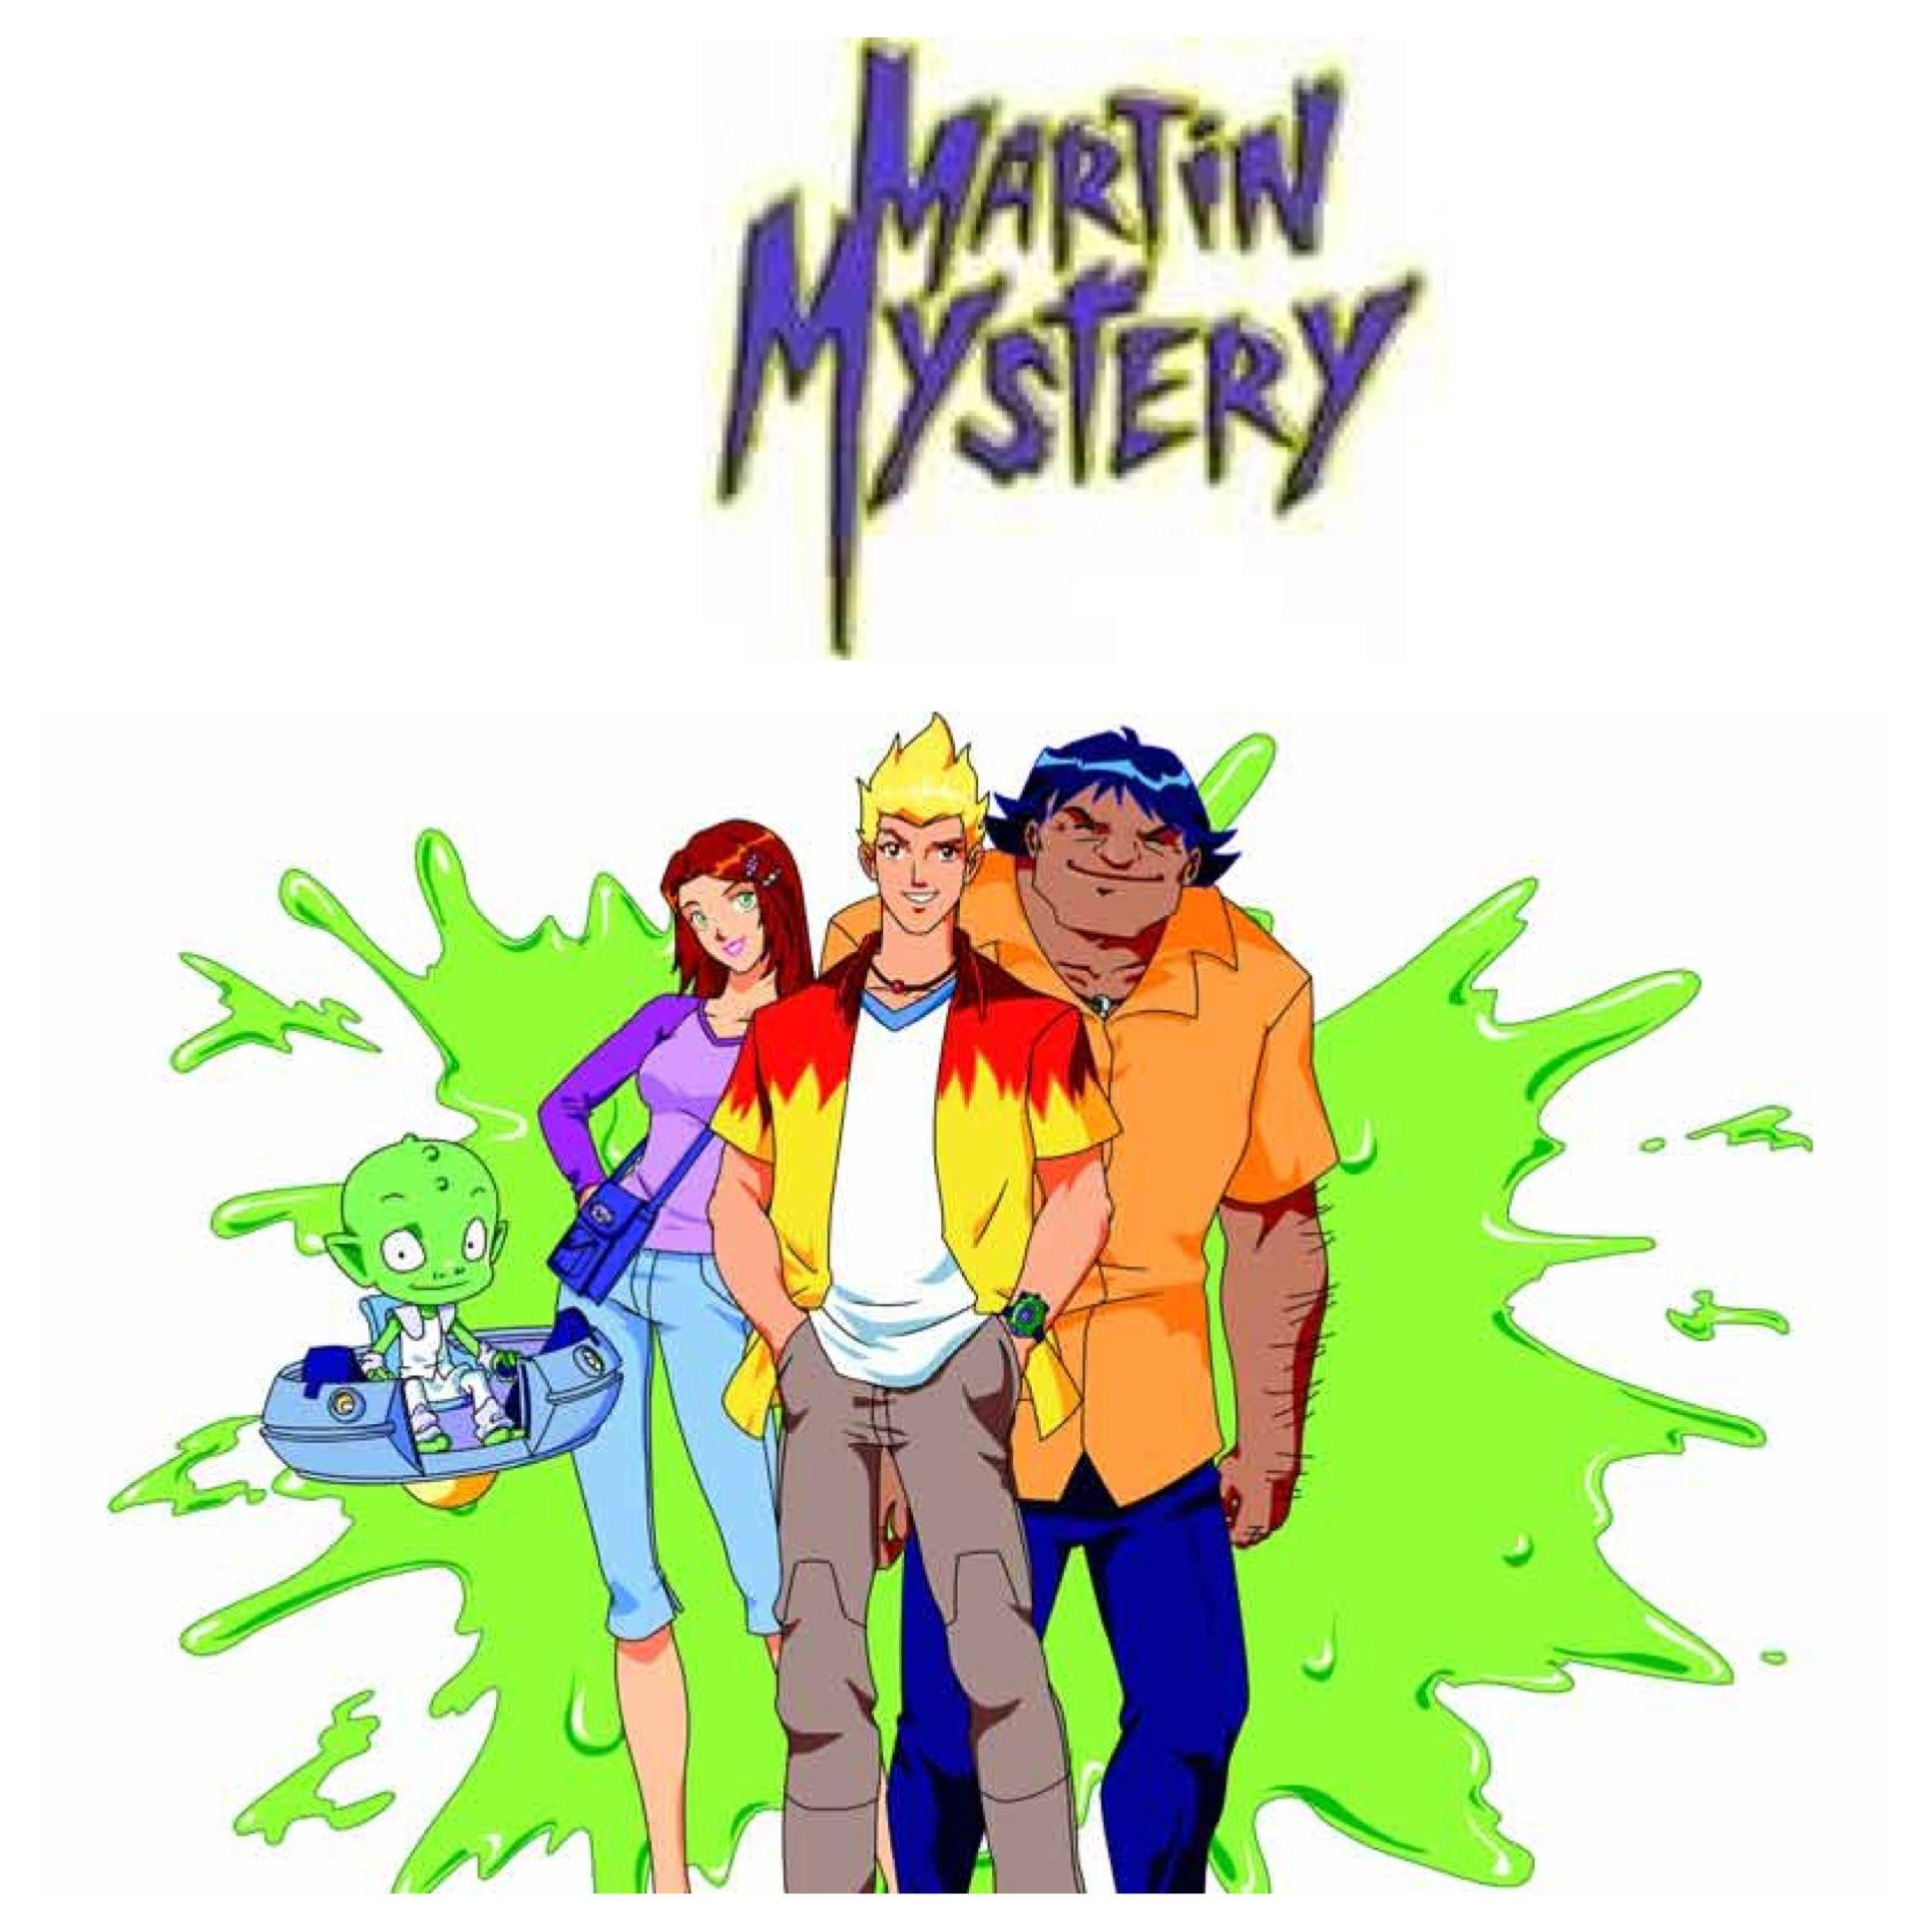 Martin mystery. It makes me so sad that no one seems to know this